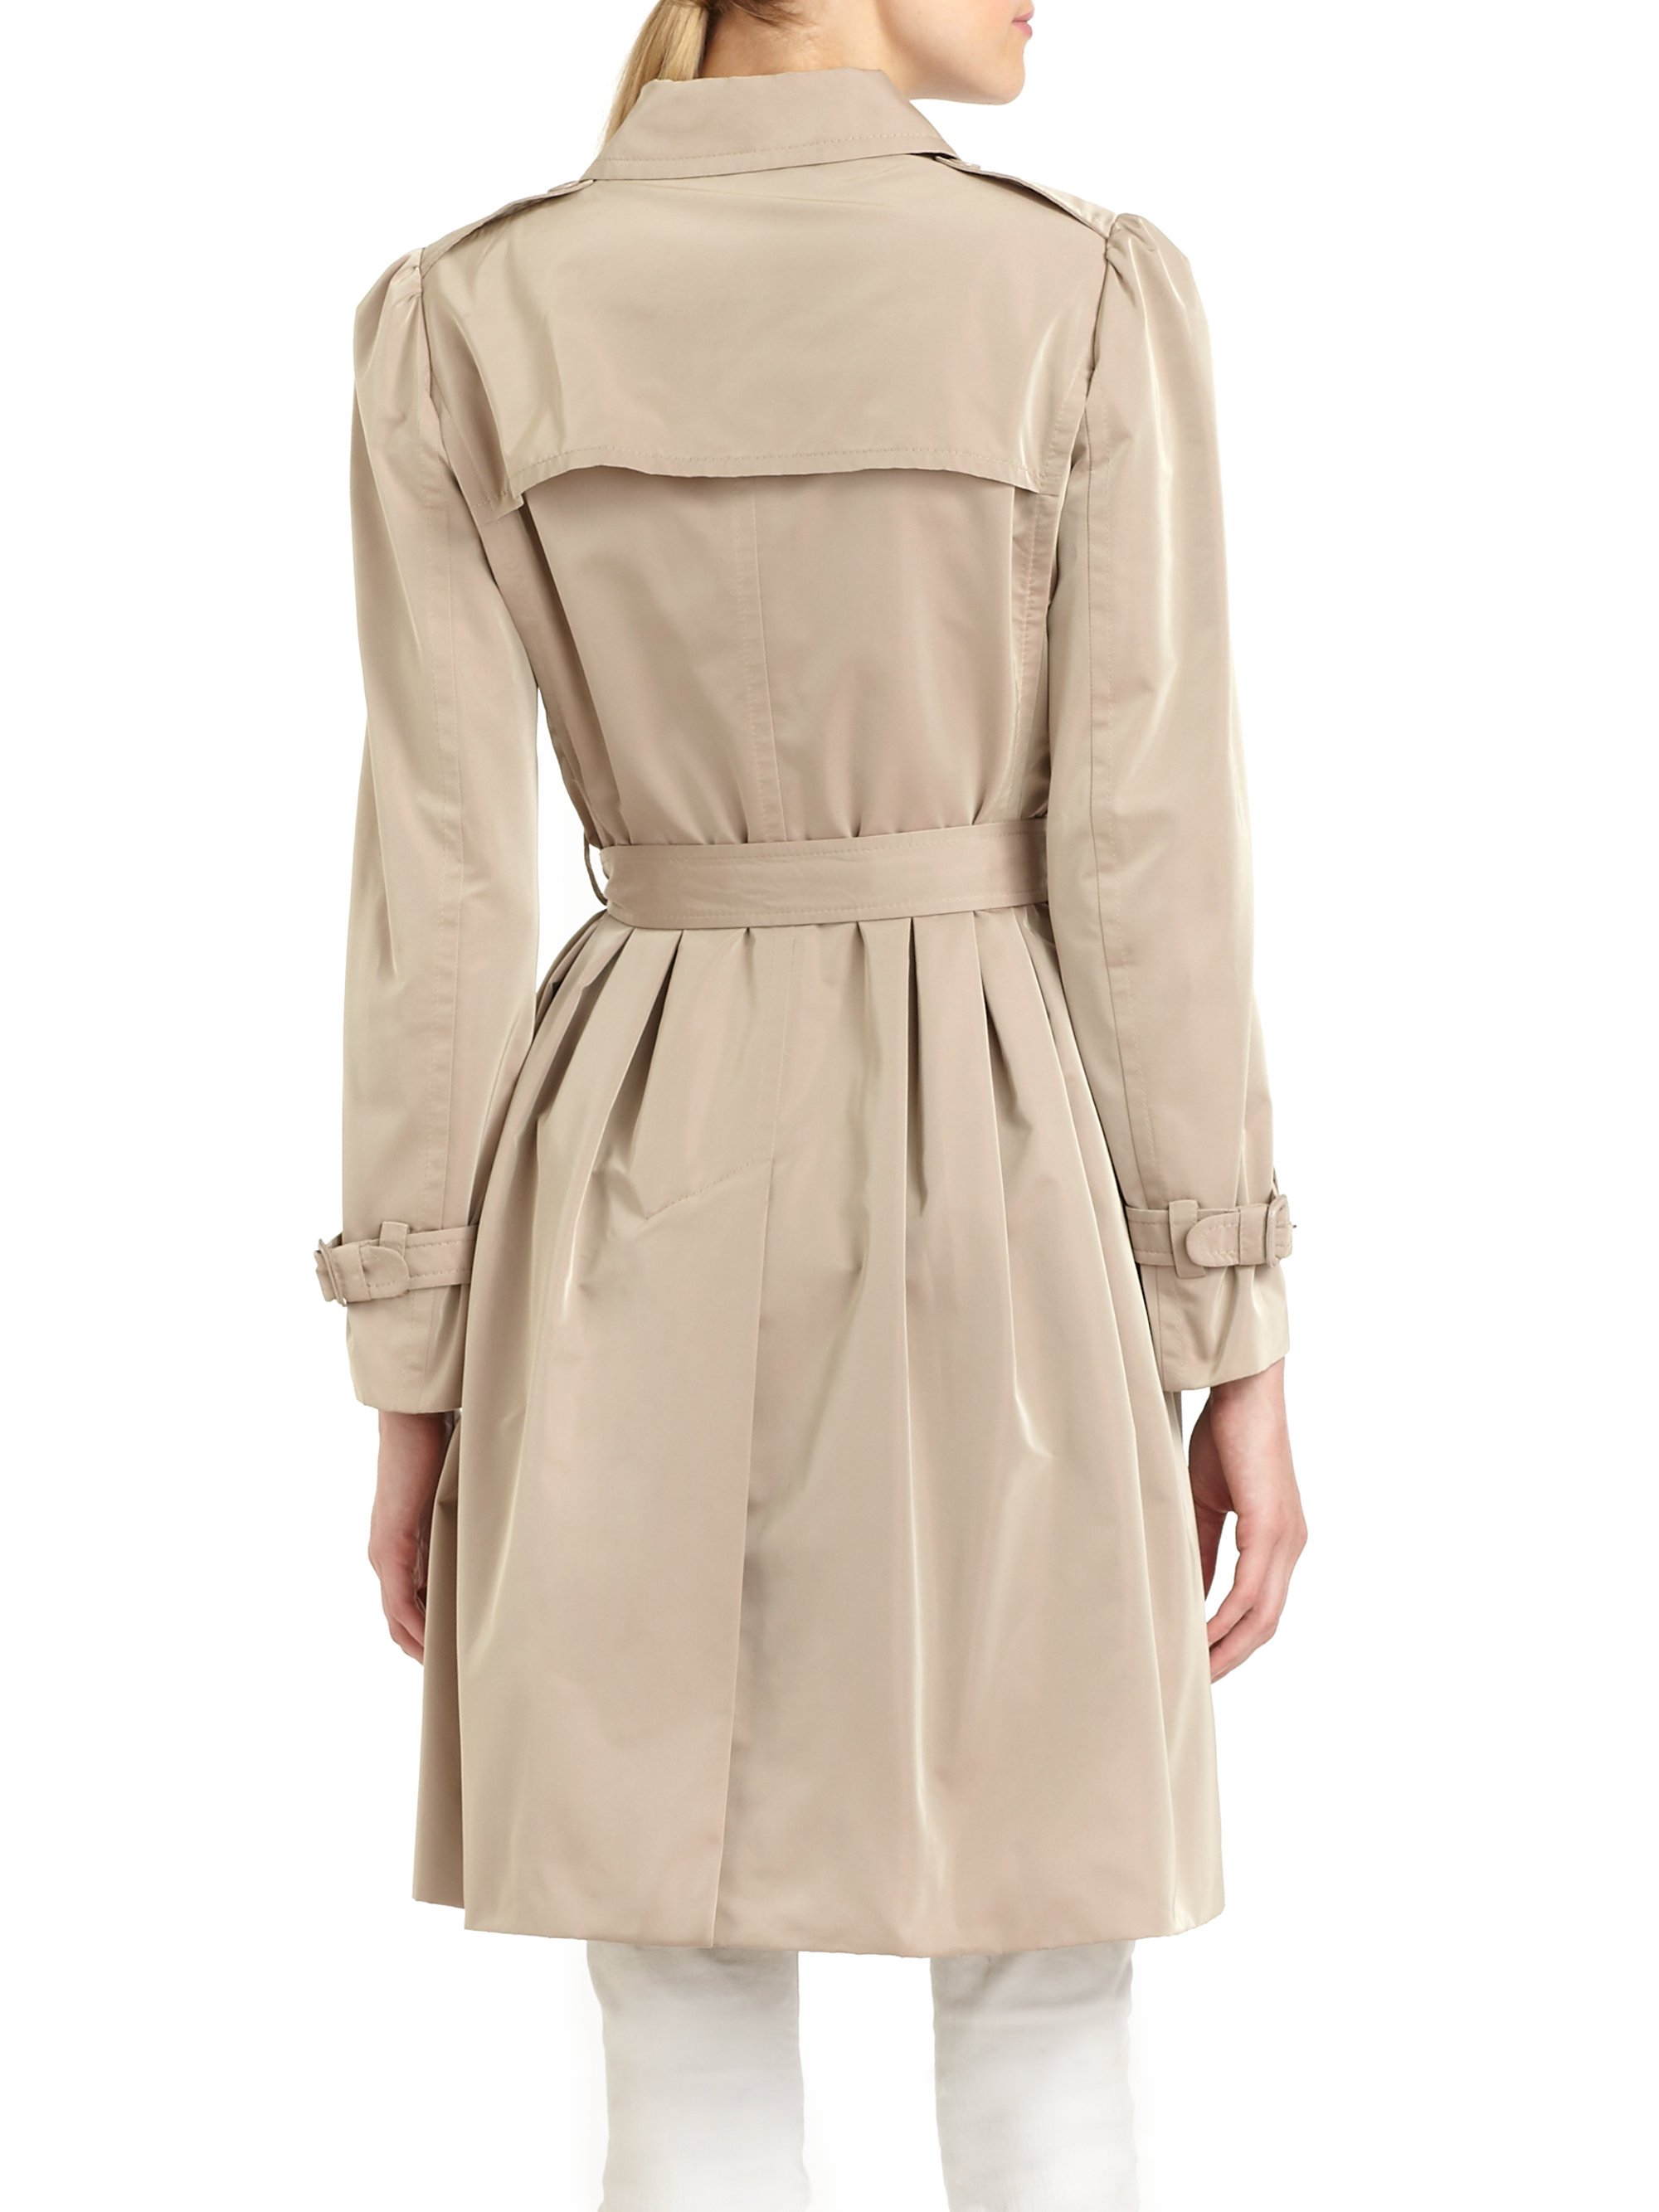 Dolce & Gabbana Belted Trench Coat in Beige (Brown) - Lyst